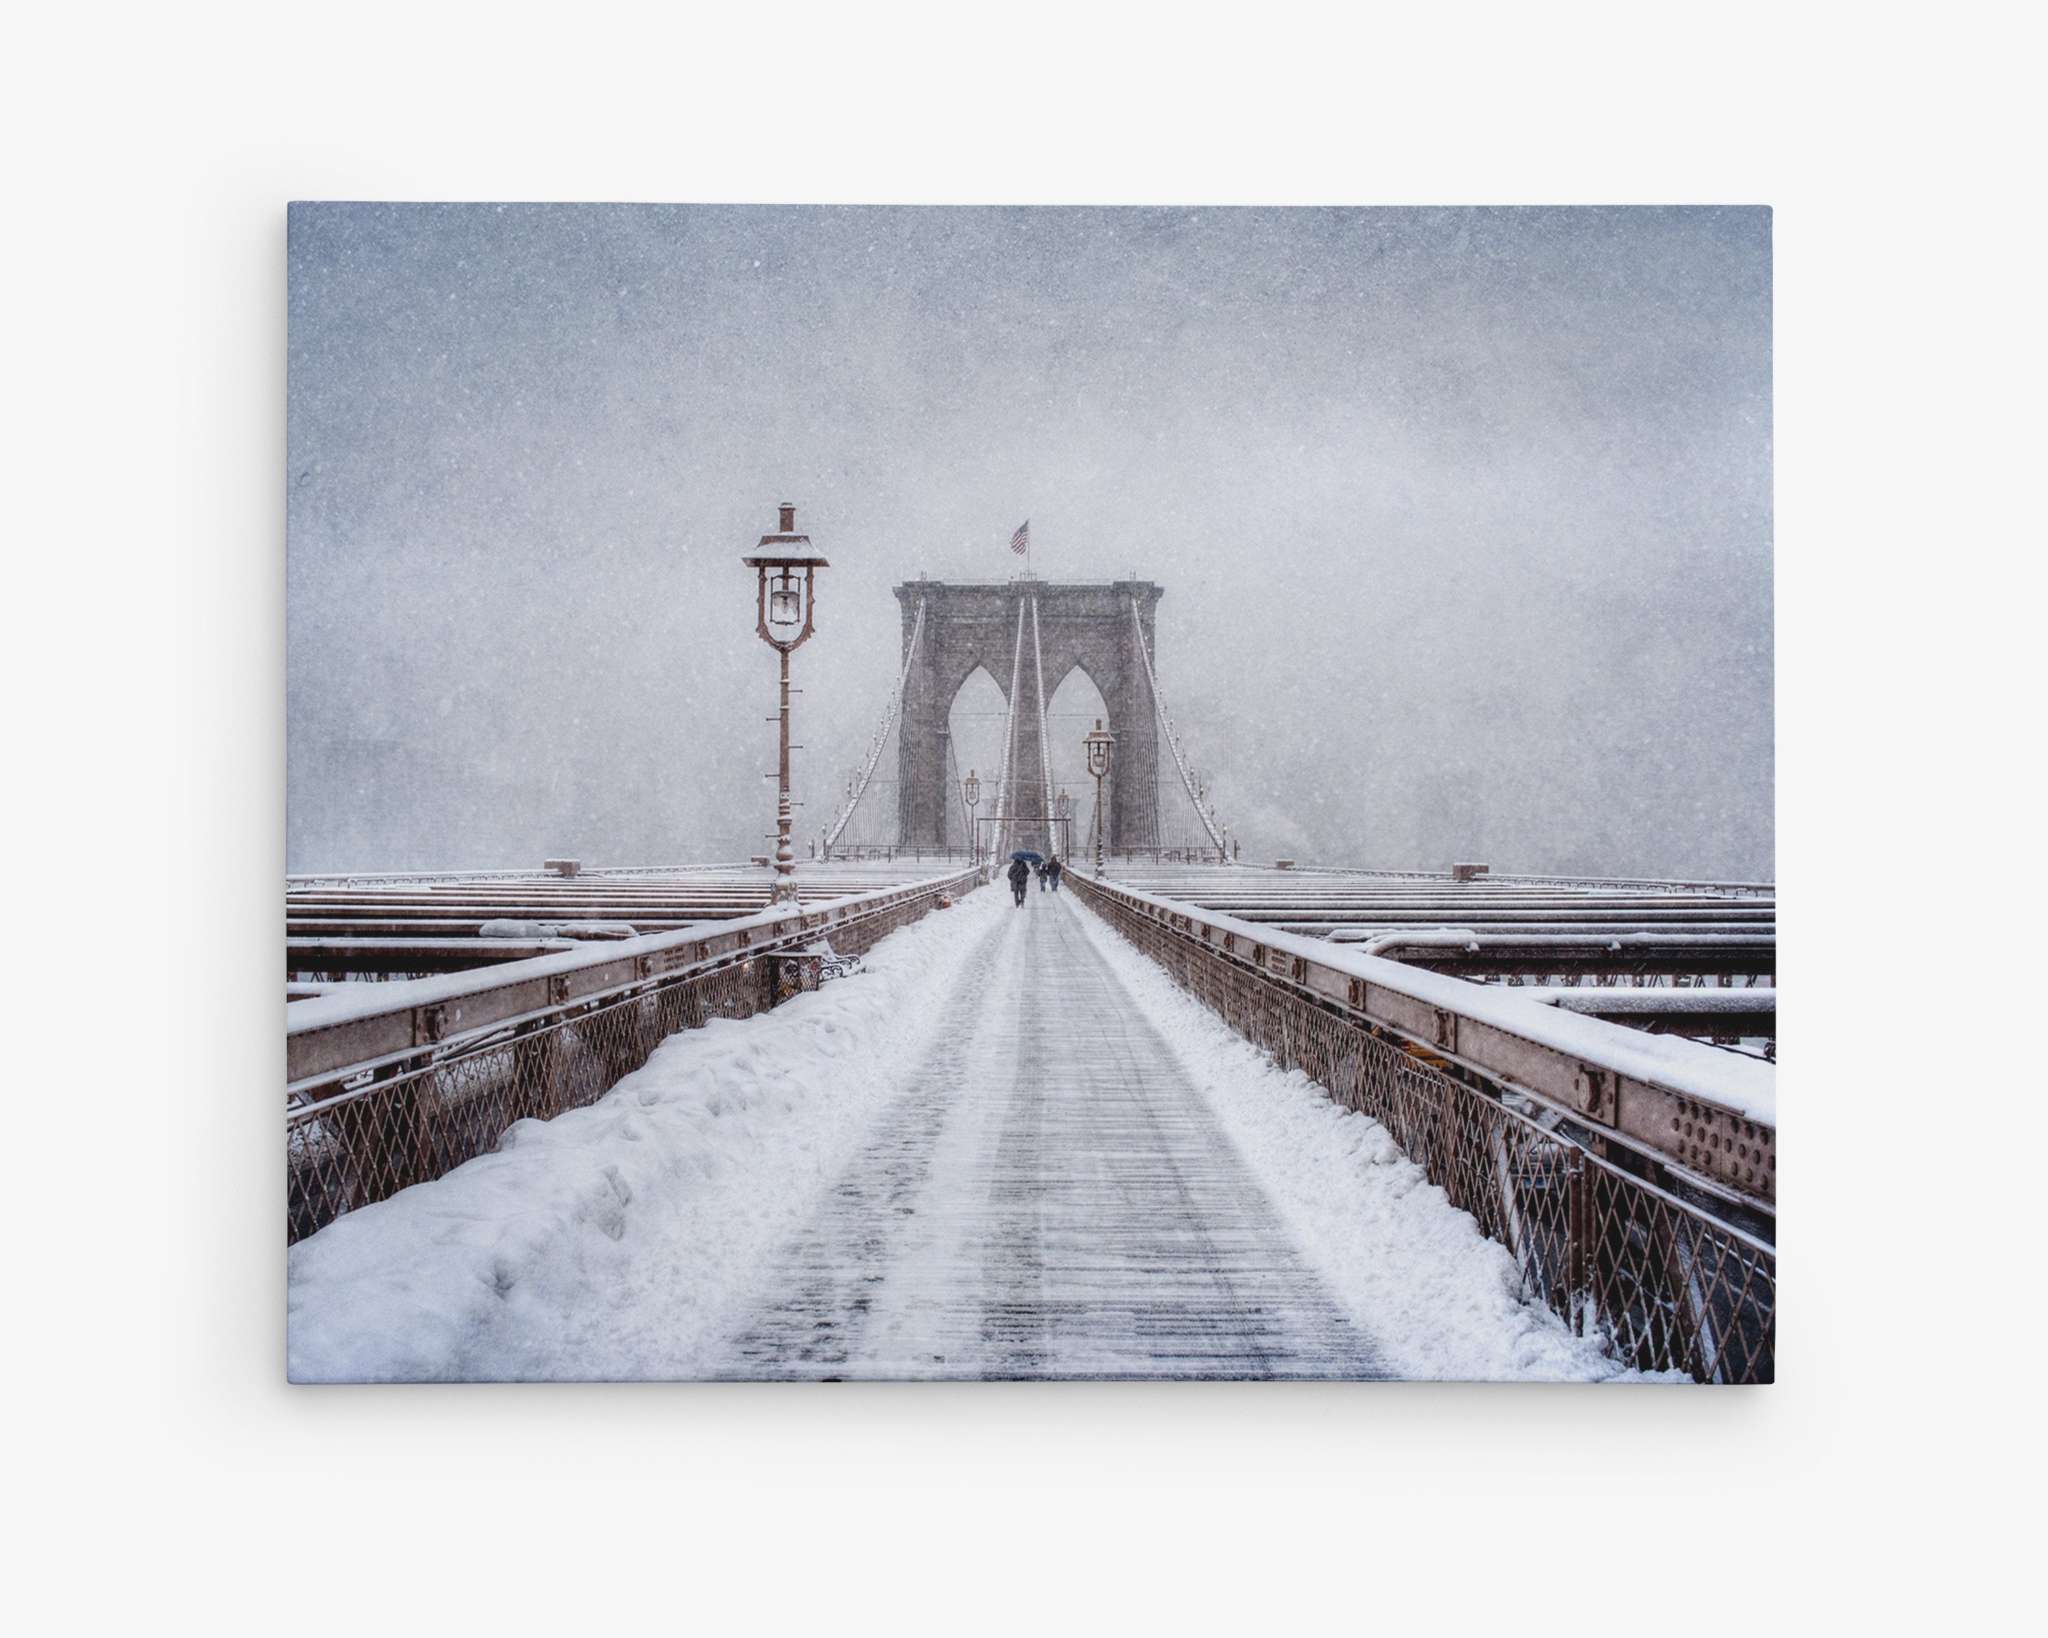 A snow-covered Brooklyn Bridge in New York City during heavy snowfall resembles a scene straight out of a Christmas card. The walkway is lined with snow, and a few people are seen in the distance walking towards the iconic twin arches, all beneath an overcast sky that creates a serene, wintery atmosphere. This picturesque view perfectly captures the essence of Offley Green's New York Brooklyn Wall Art, 'Brooklyn Snow.'